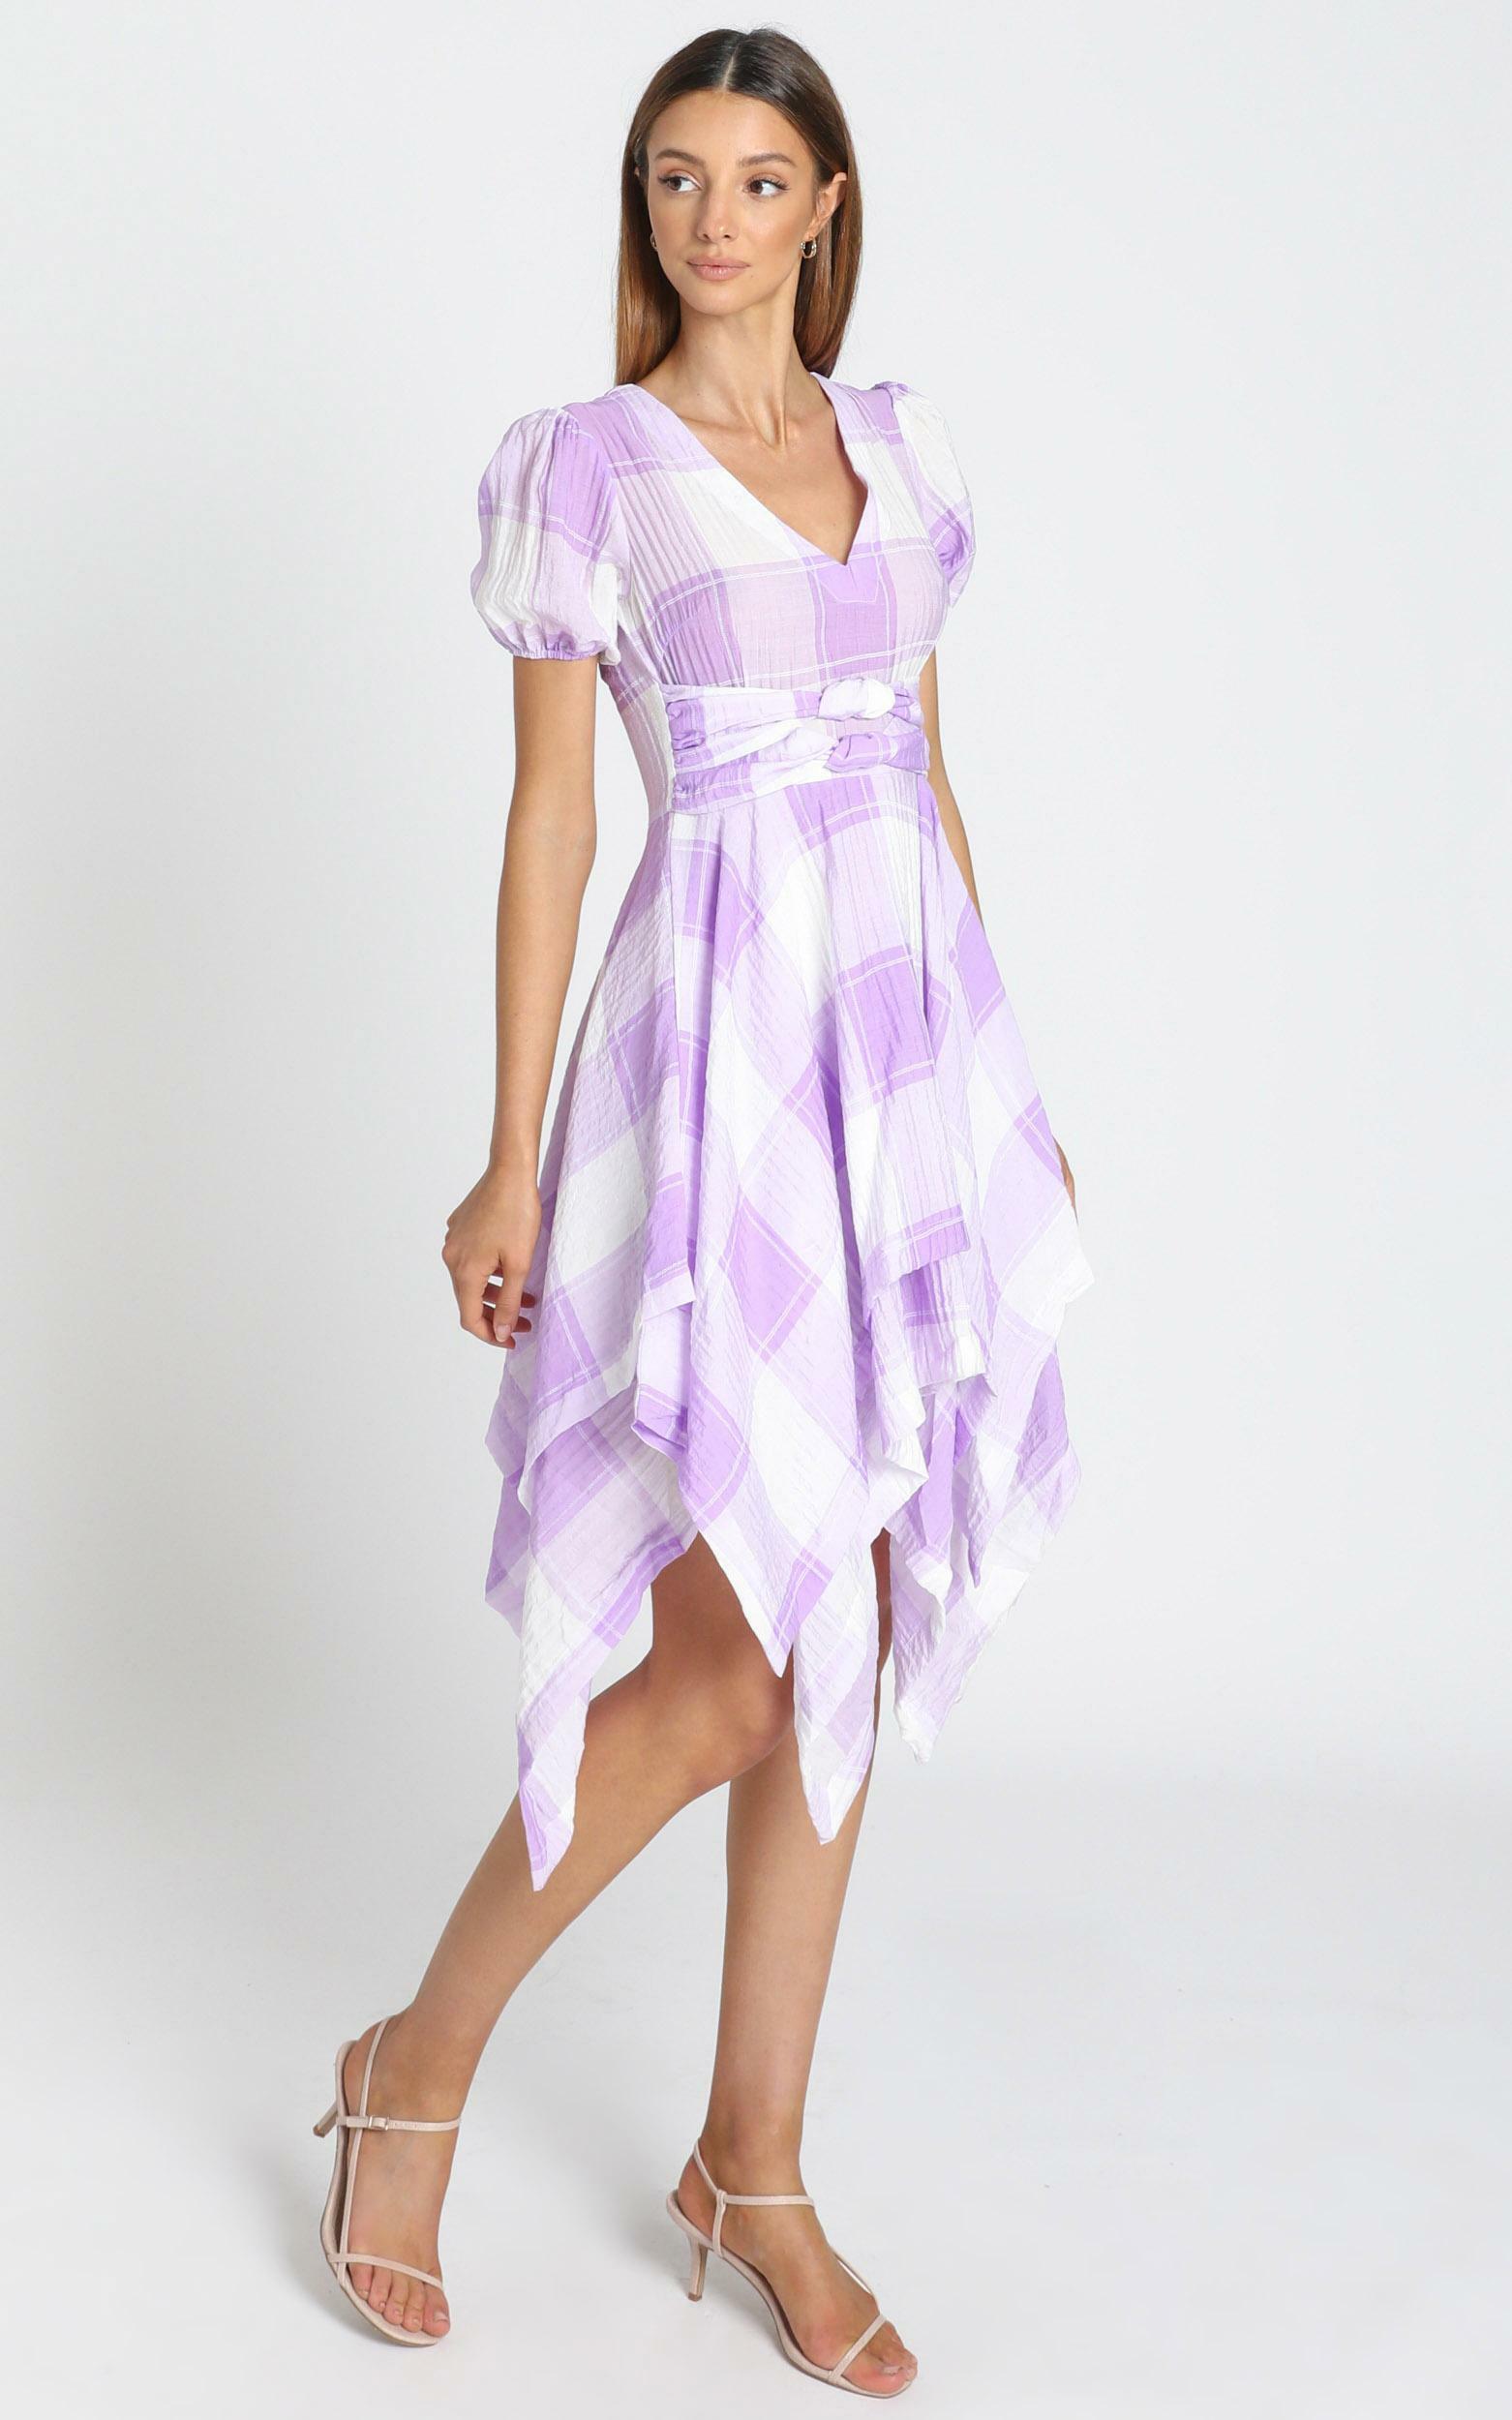 Ola Dress in lavender check - 8 (S), Purple, hi-res image number null